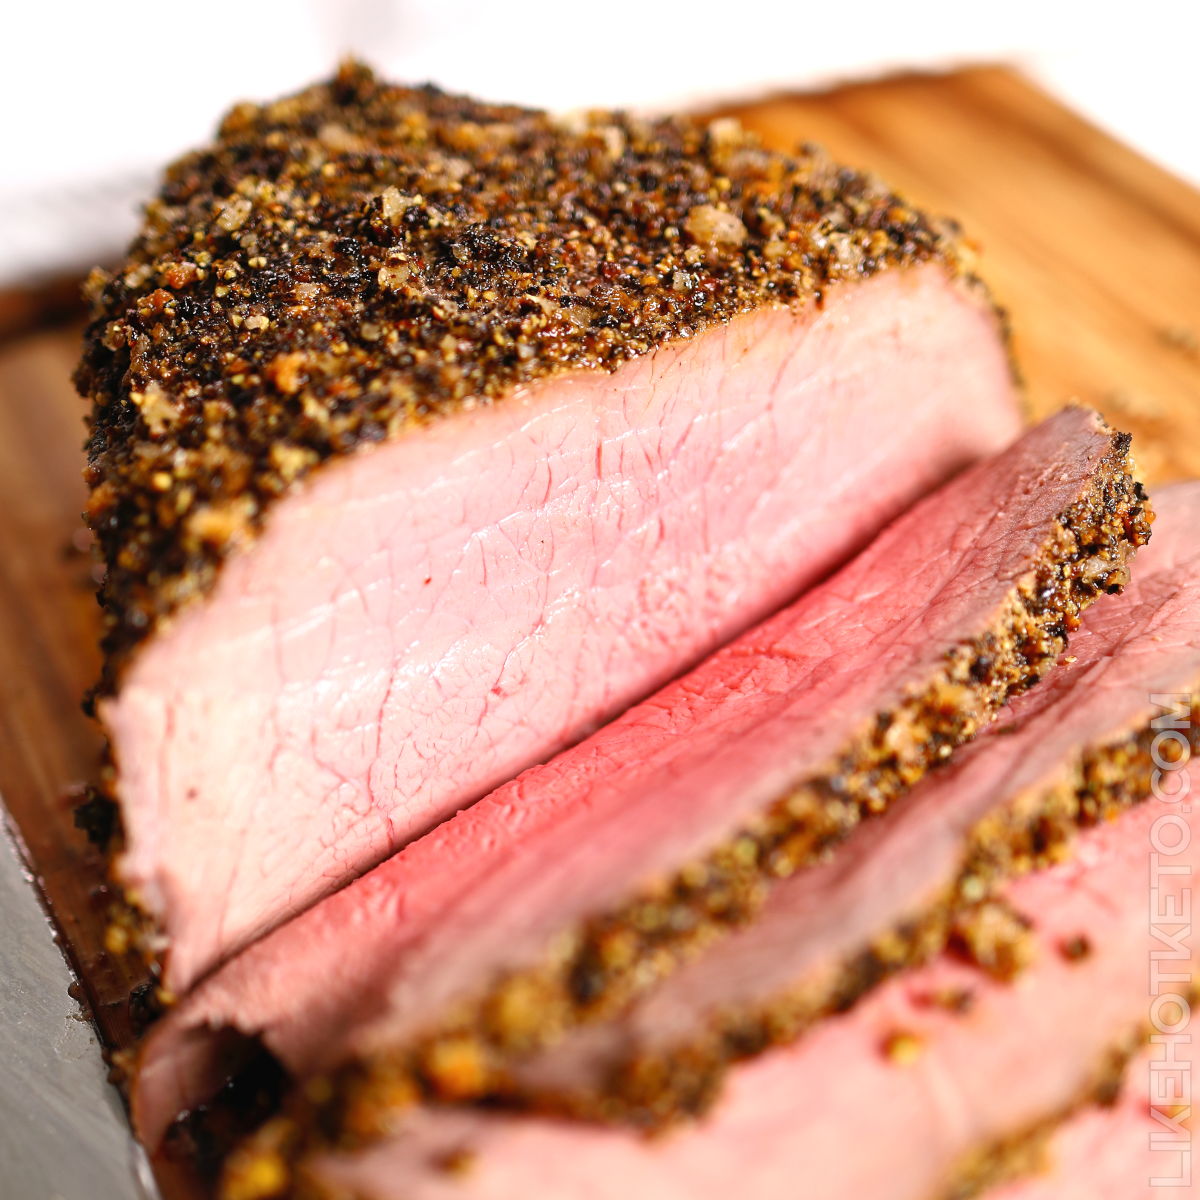 Peppercorn crusted beef roast, carved on wooden board, with medium-rare pink slices.